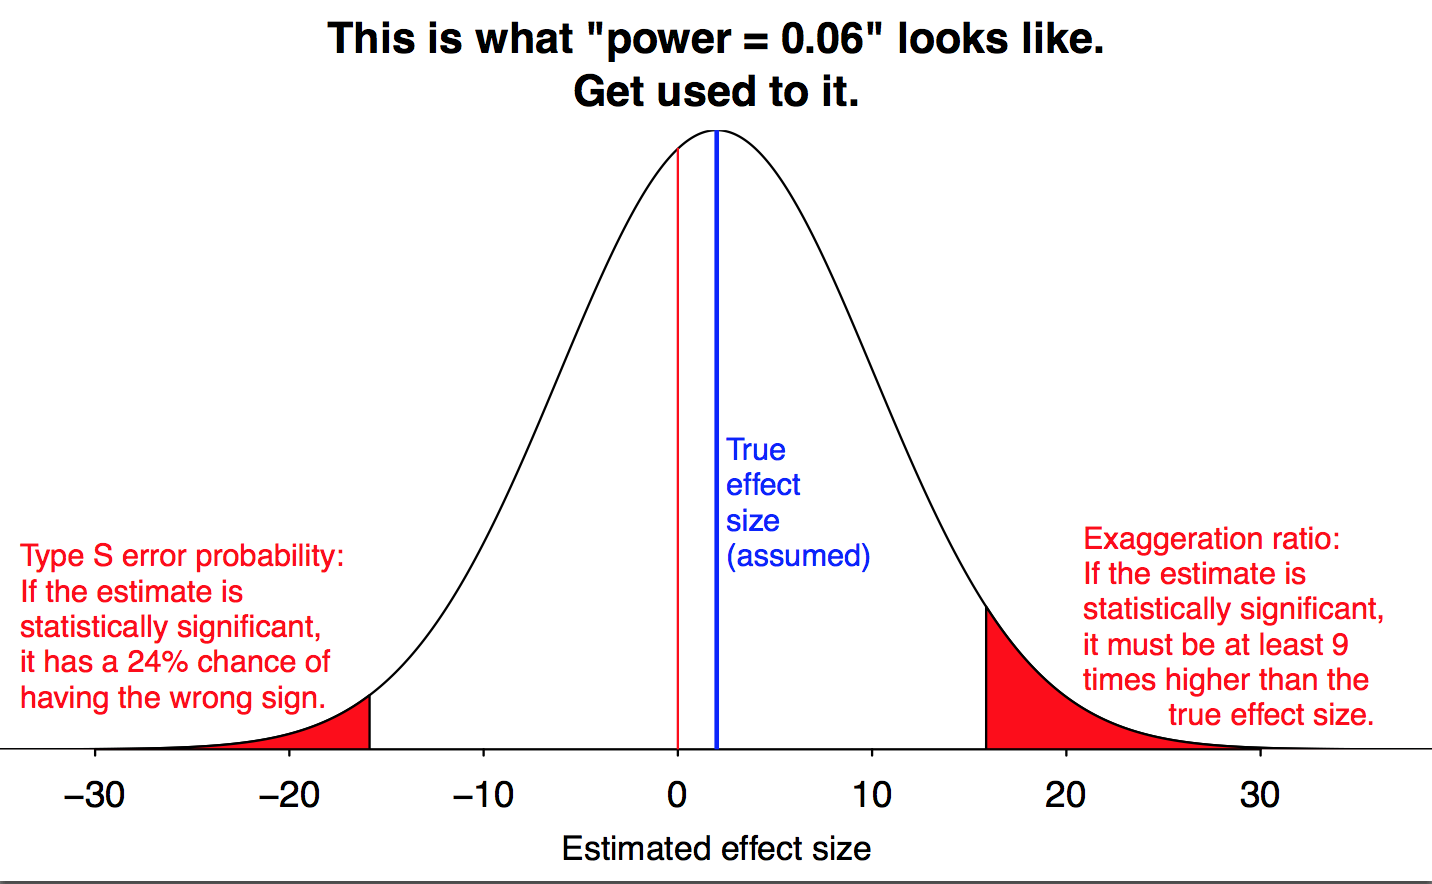 A diagram of the effects of low-power studies. 
This is what "power = 0.06" looks like.  Get used to it. 
Type S error probability: If the estimate is statistically significant, it has a 24% chance of having the wrong sign. 
Exaggeration ratio: If the estimate is statistically significant, it must be at least 9 times higher than the effect size.